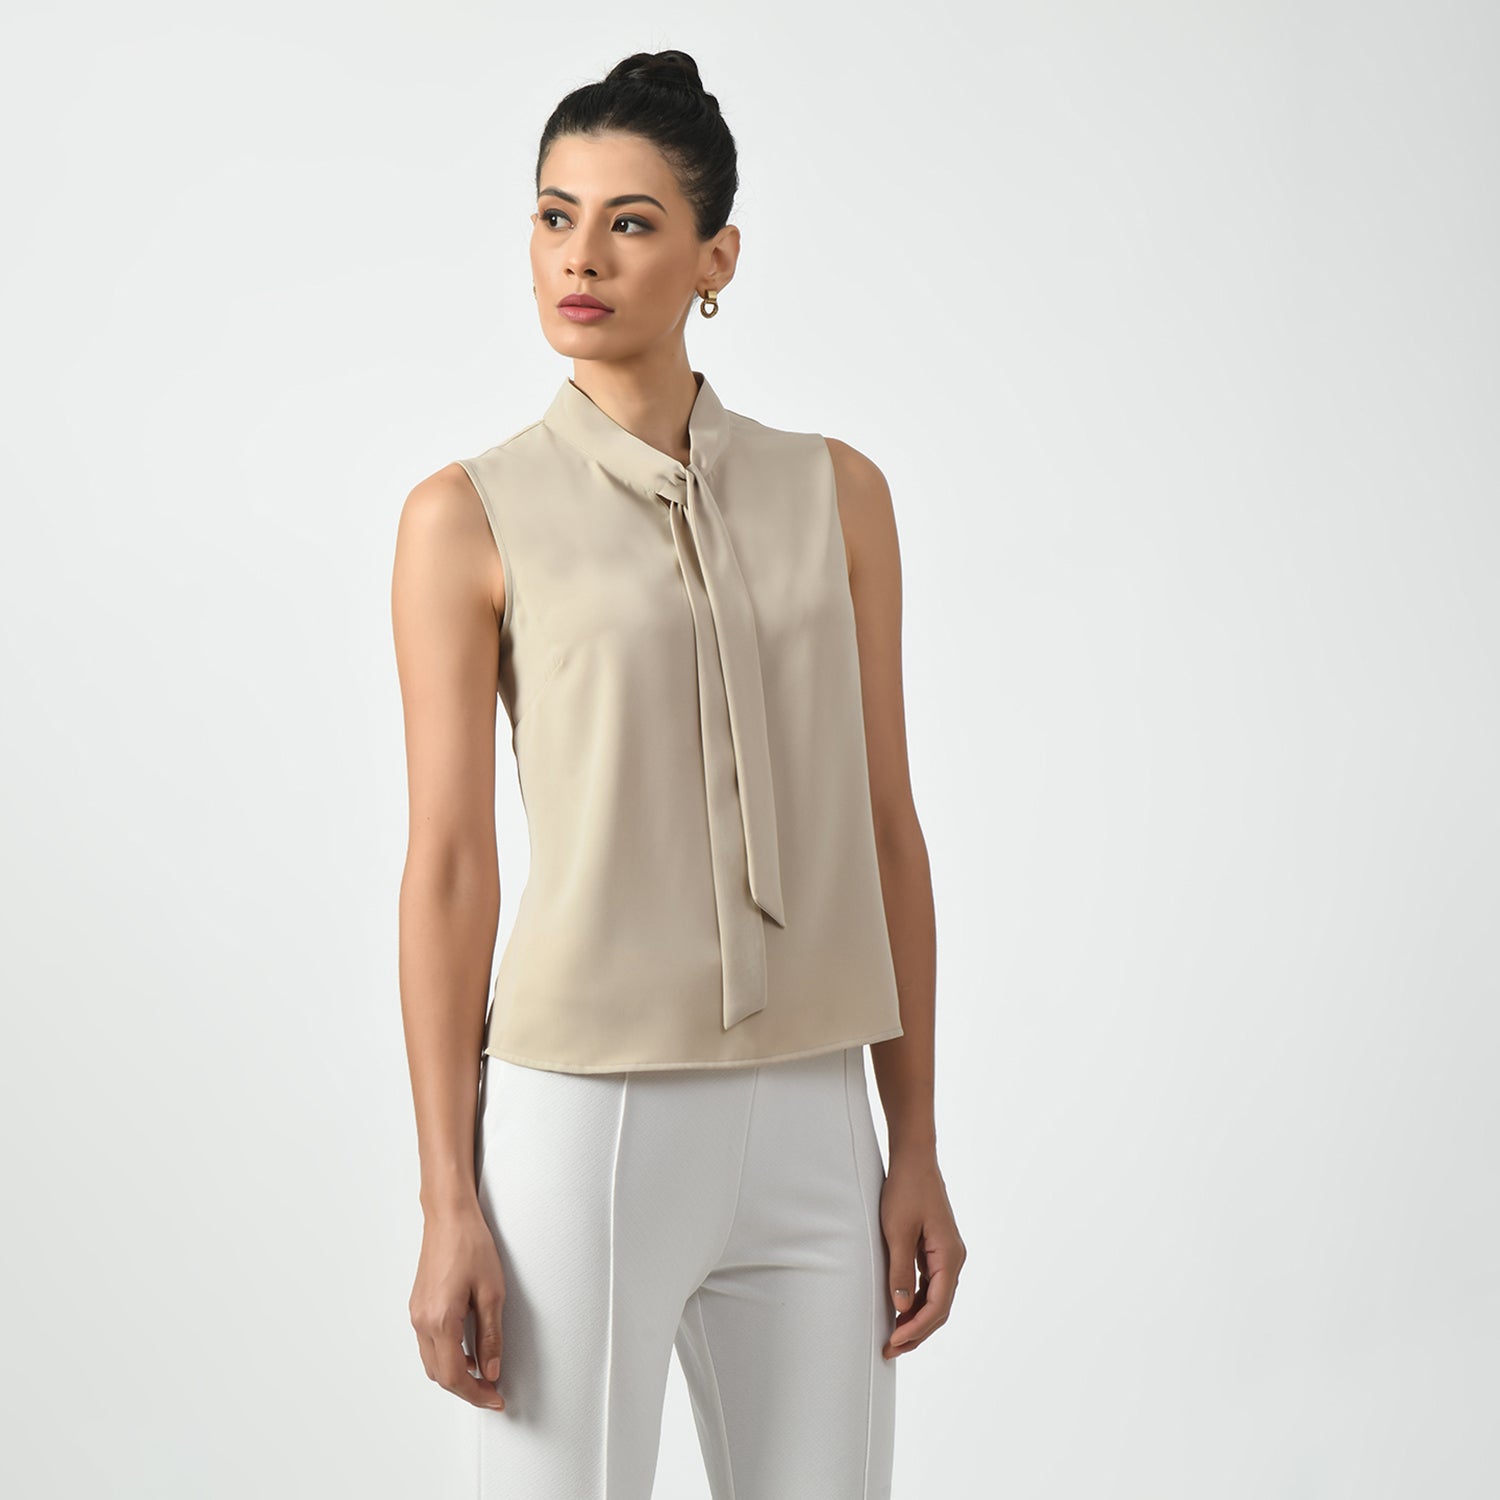 Light Beige Sleeveless Top With Knot